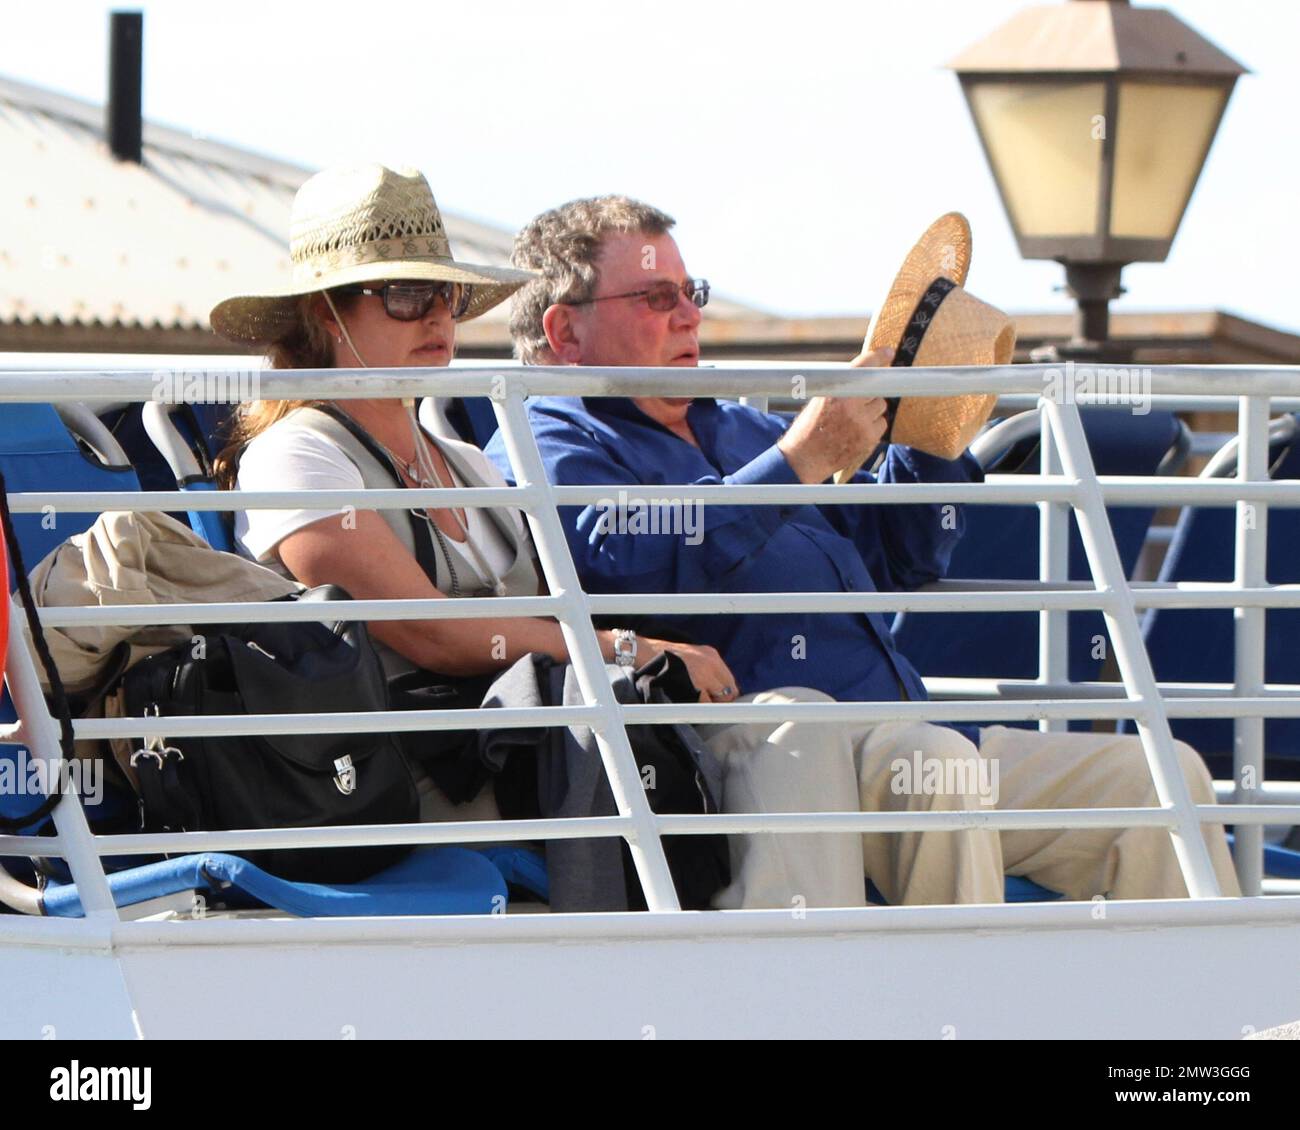 EXCLUSIVE!! Actor William Shatner and wife Elizabeth Martin are seen boarding a boat whilst on holiday in Hawaii.   The star worldly recognized as Captain Kirk of the 'Star Trek' series, tried to stay incognito under a Panama hat whilst boarding the boat with luggage and a bag full of water noodles.  Shatner, 80, is reportedly headed to Broadway again.  His one man show, 'Shatner's World: We Just Live In It' will debut in February 2012 for a brief run at the Music Box Theatre on Broadway. The show which Shatner wrote himself, will kick off a 15-week national tour and is based on the years of f Stock Photo